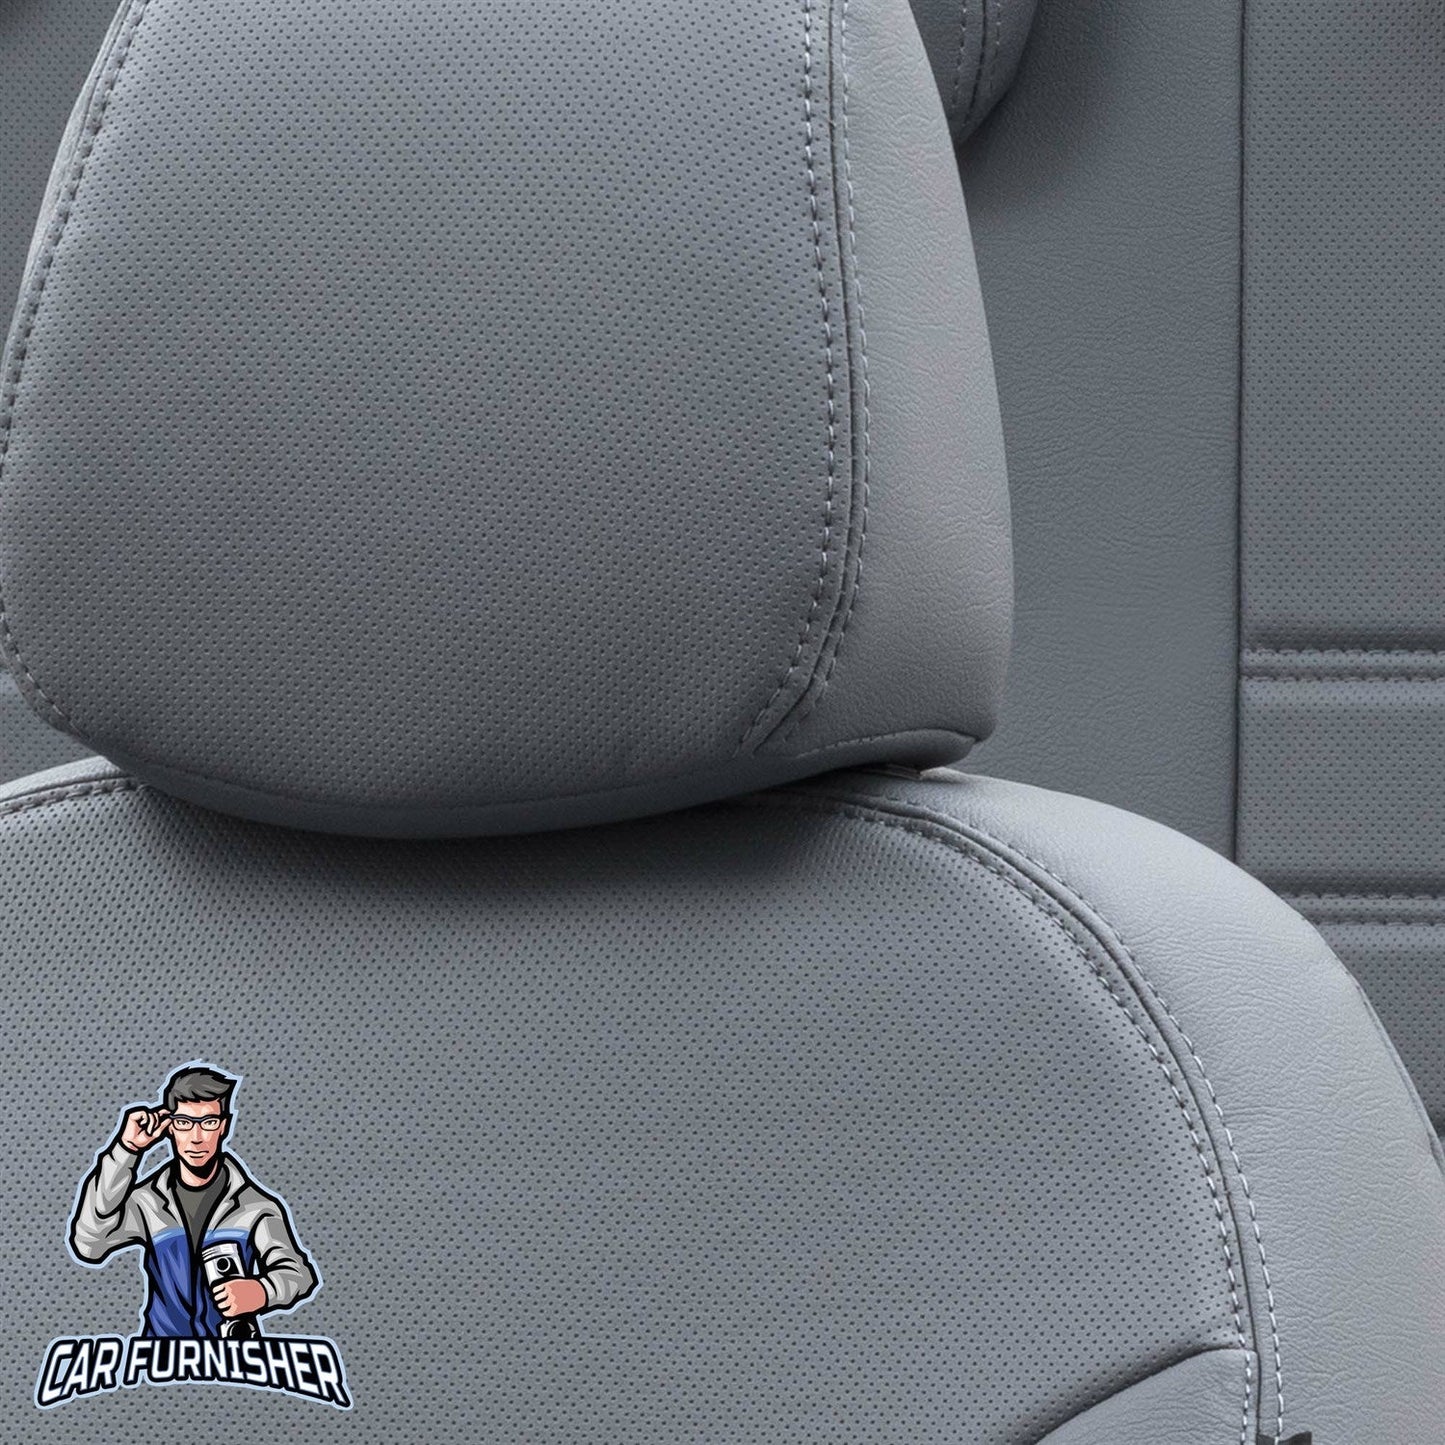 Fiat Stilo Seat Covers Istanbul Leather Design Smoked Leather